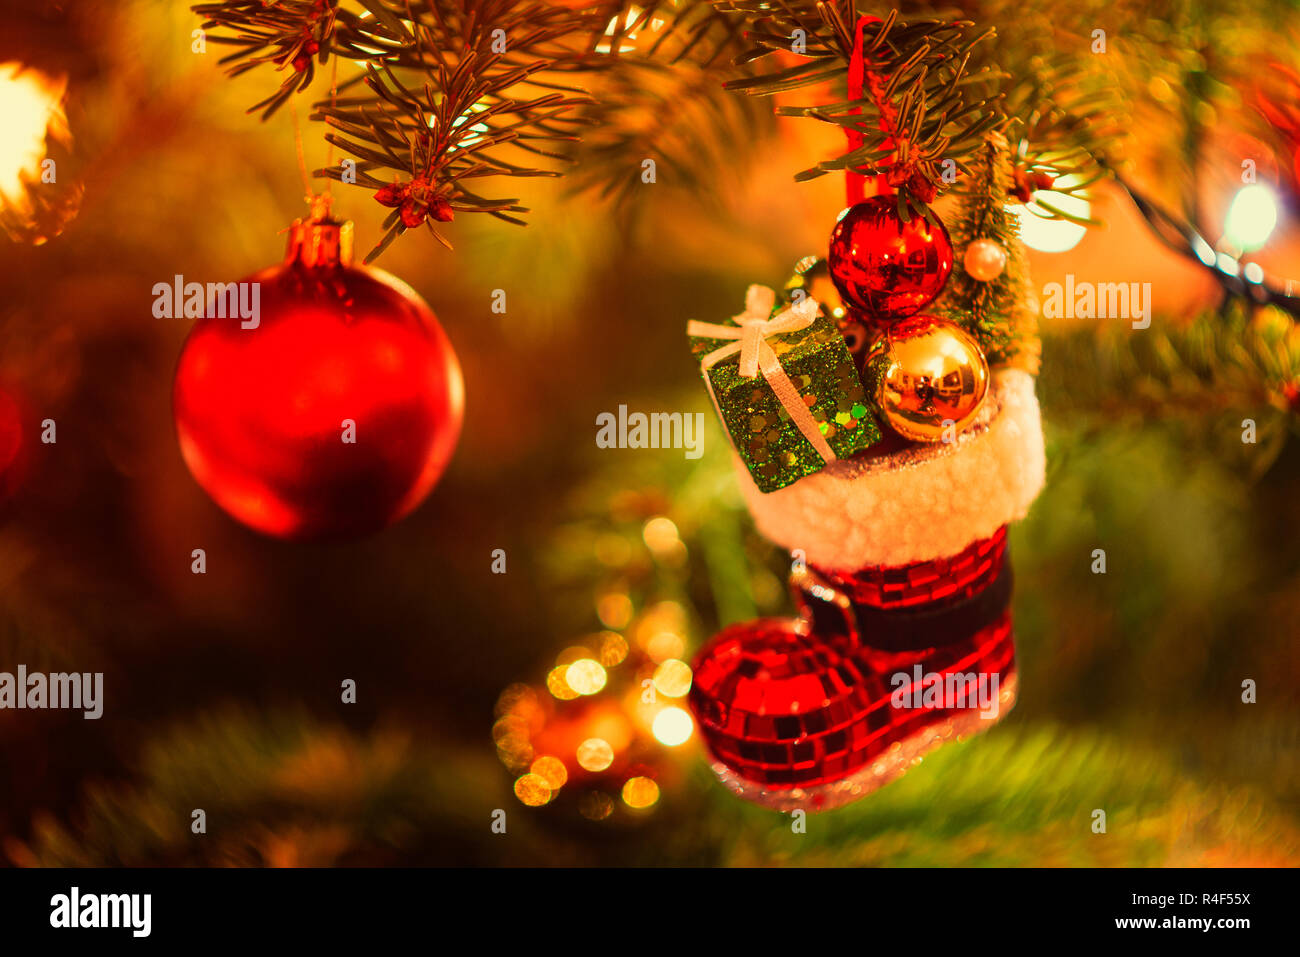 Miniature Boot filled with Presents hanging in Christmas Tree Stock Photo